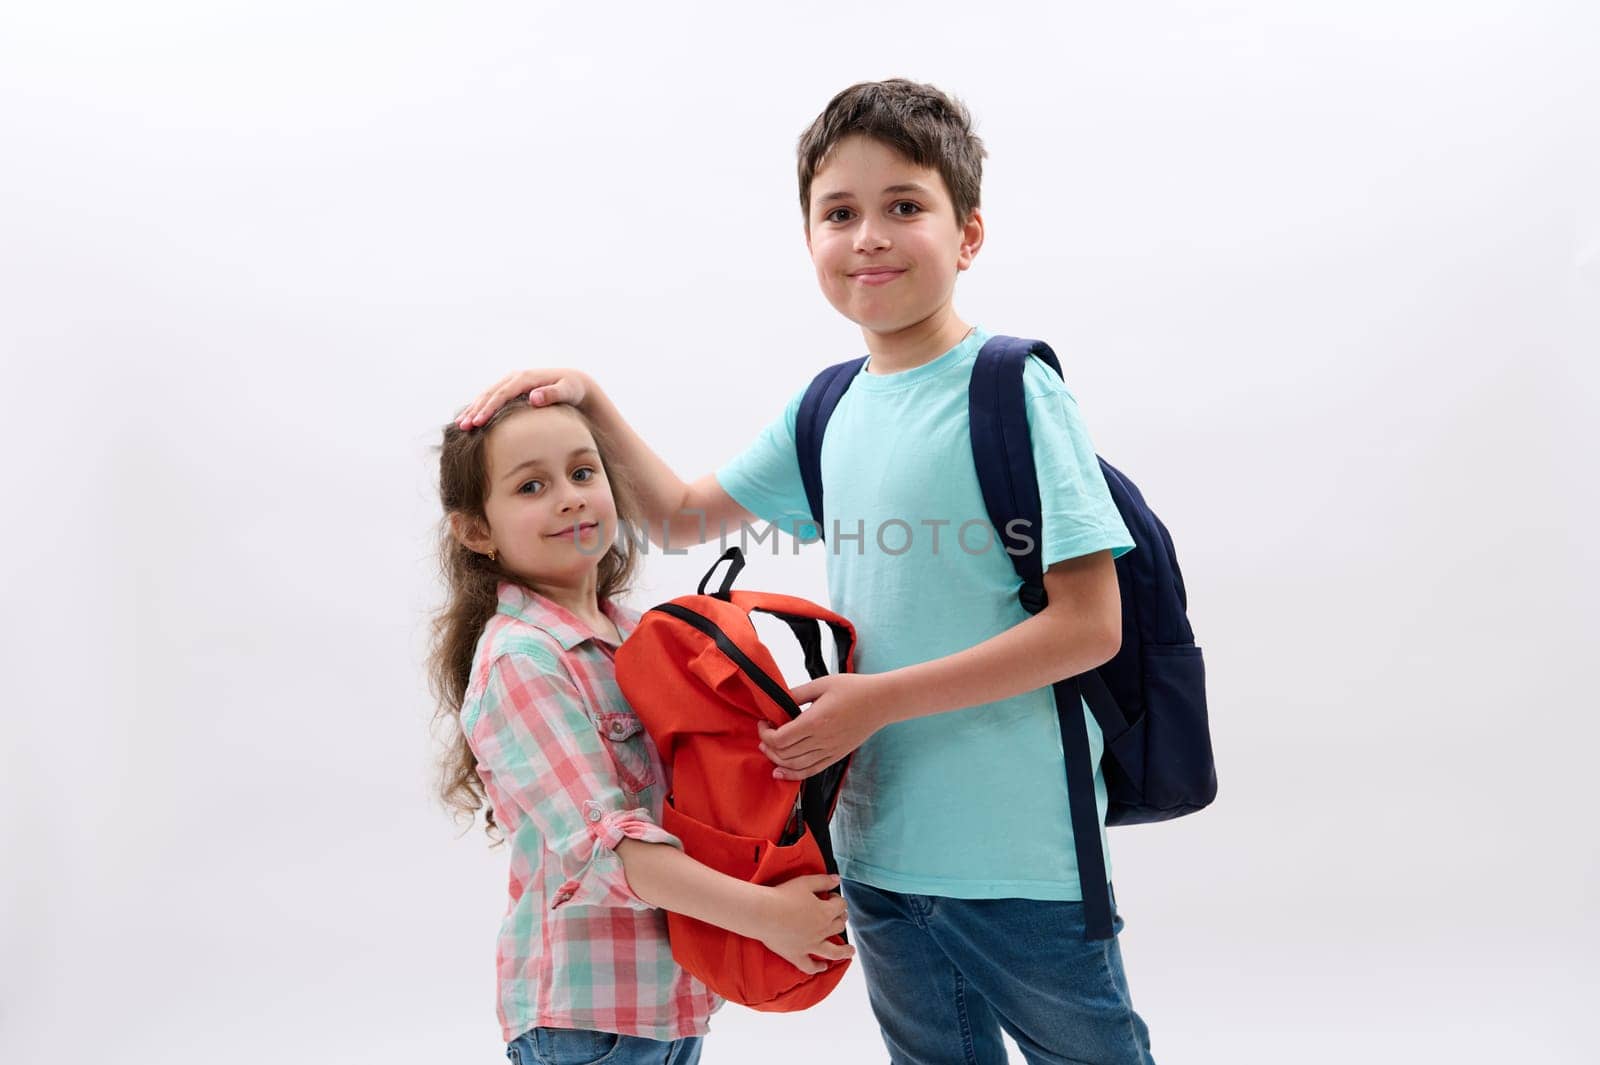 Caucasian handsome preteen child boy with backpack, strokes his younger sister, ready to go at school, starting new semester of academic year, smiling looking at camera, isolated over white background